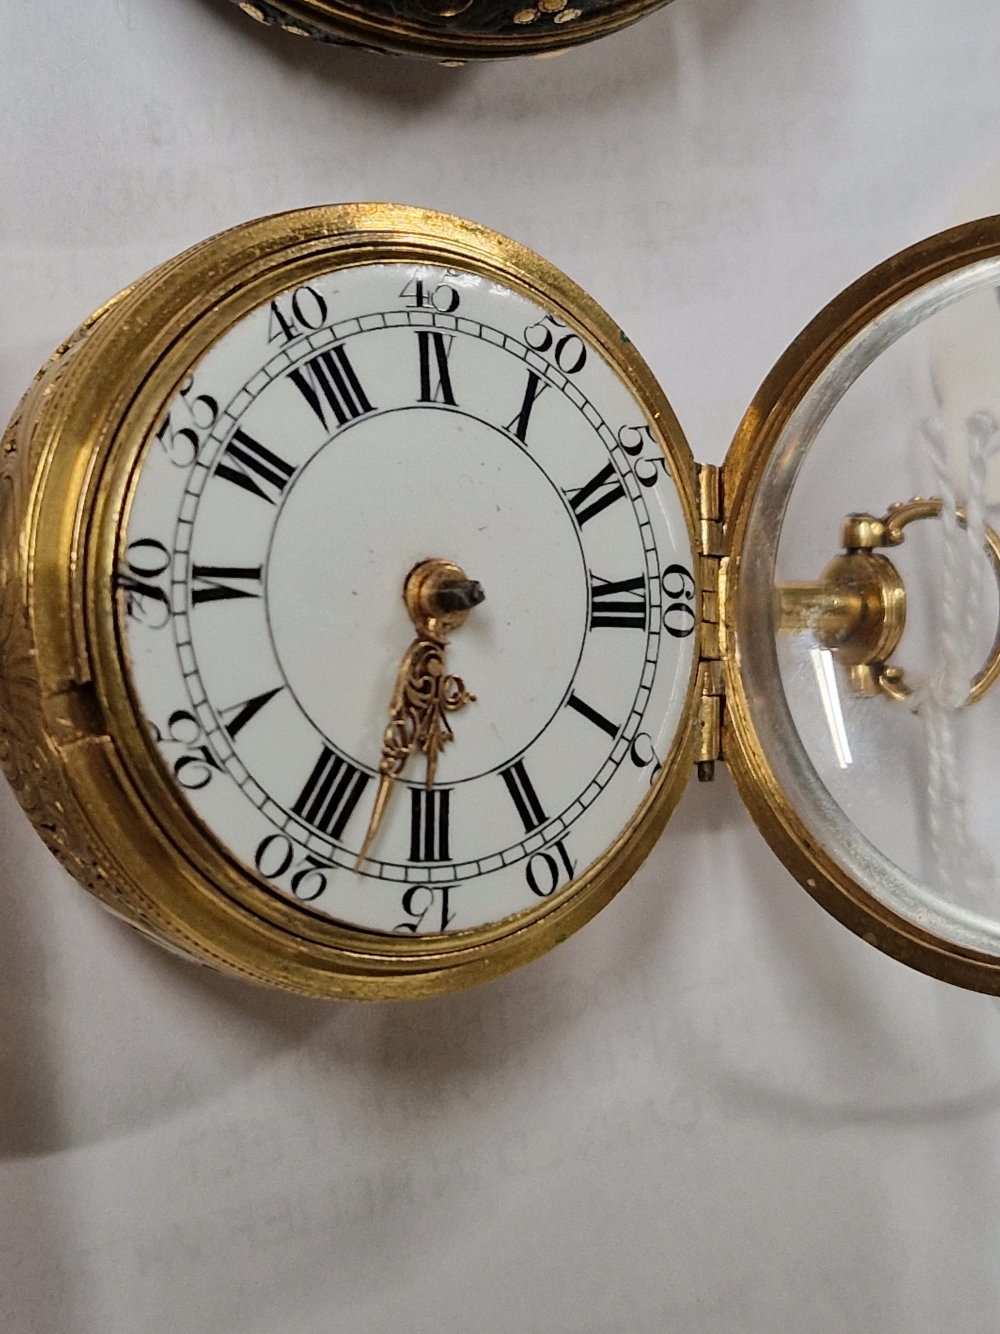 AN ANTIQUE GOLD PAIR CASED POCKET WATCH, SIGNED BONLY LONDON, (SIC) PROBABLY DEVERAUX BOWLEY, - Image 13 of 21